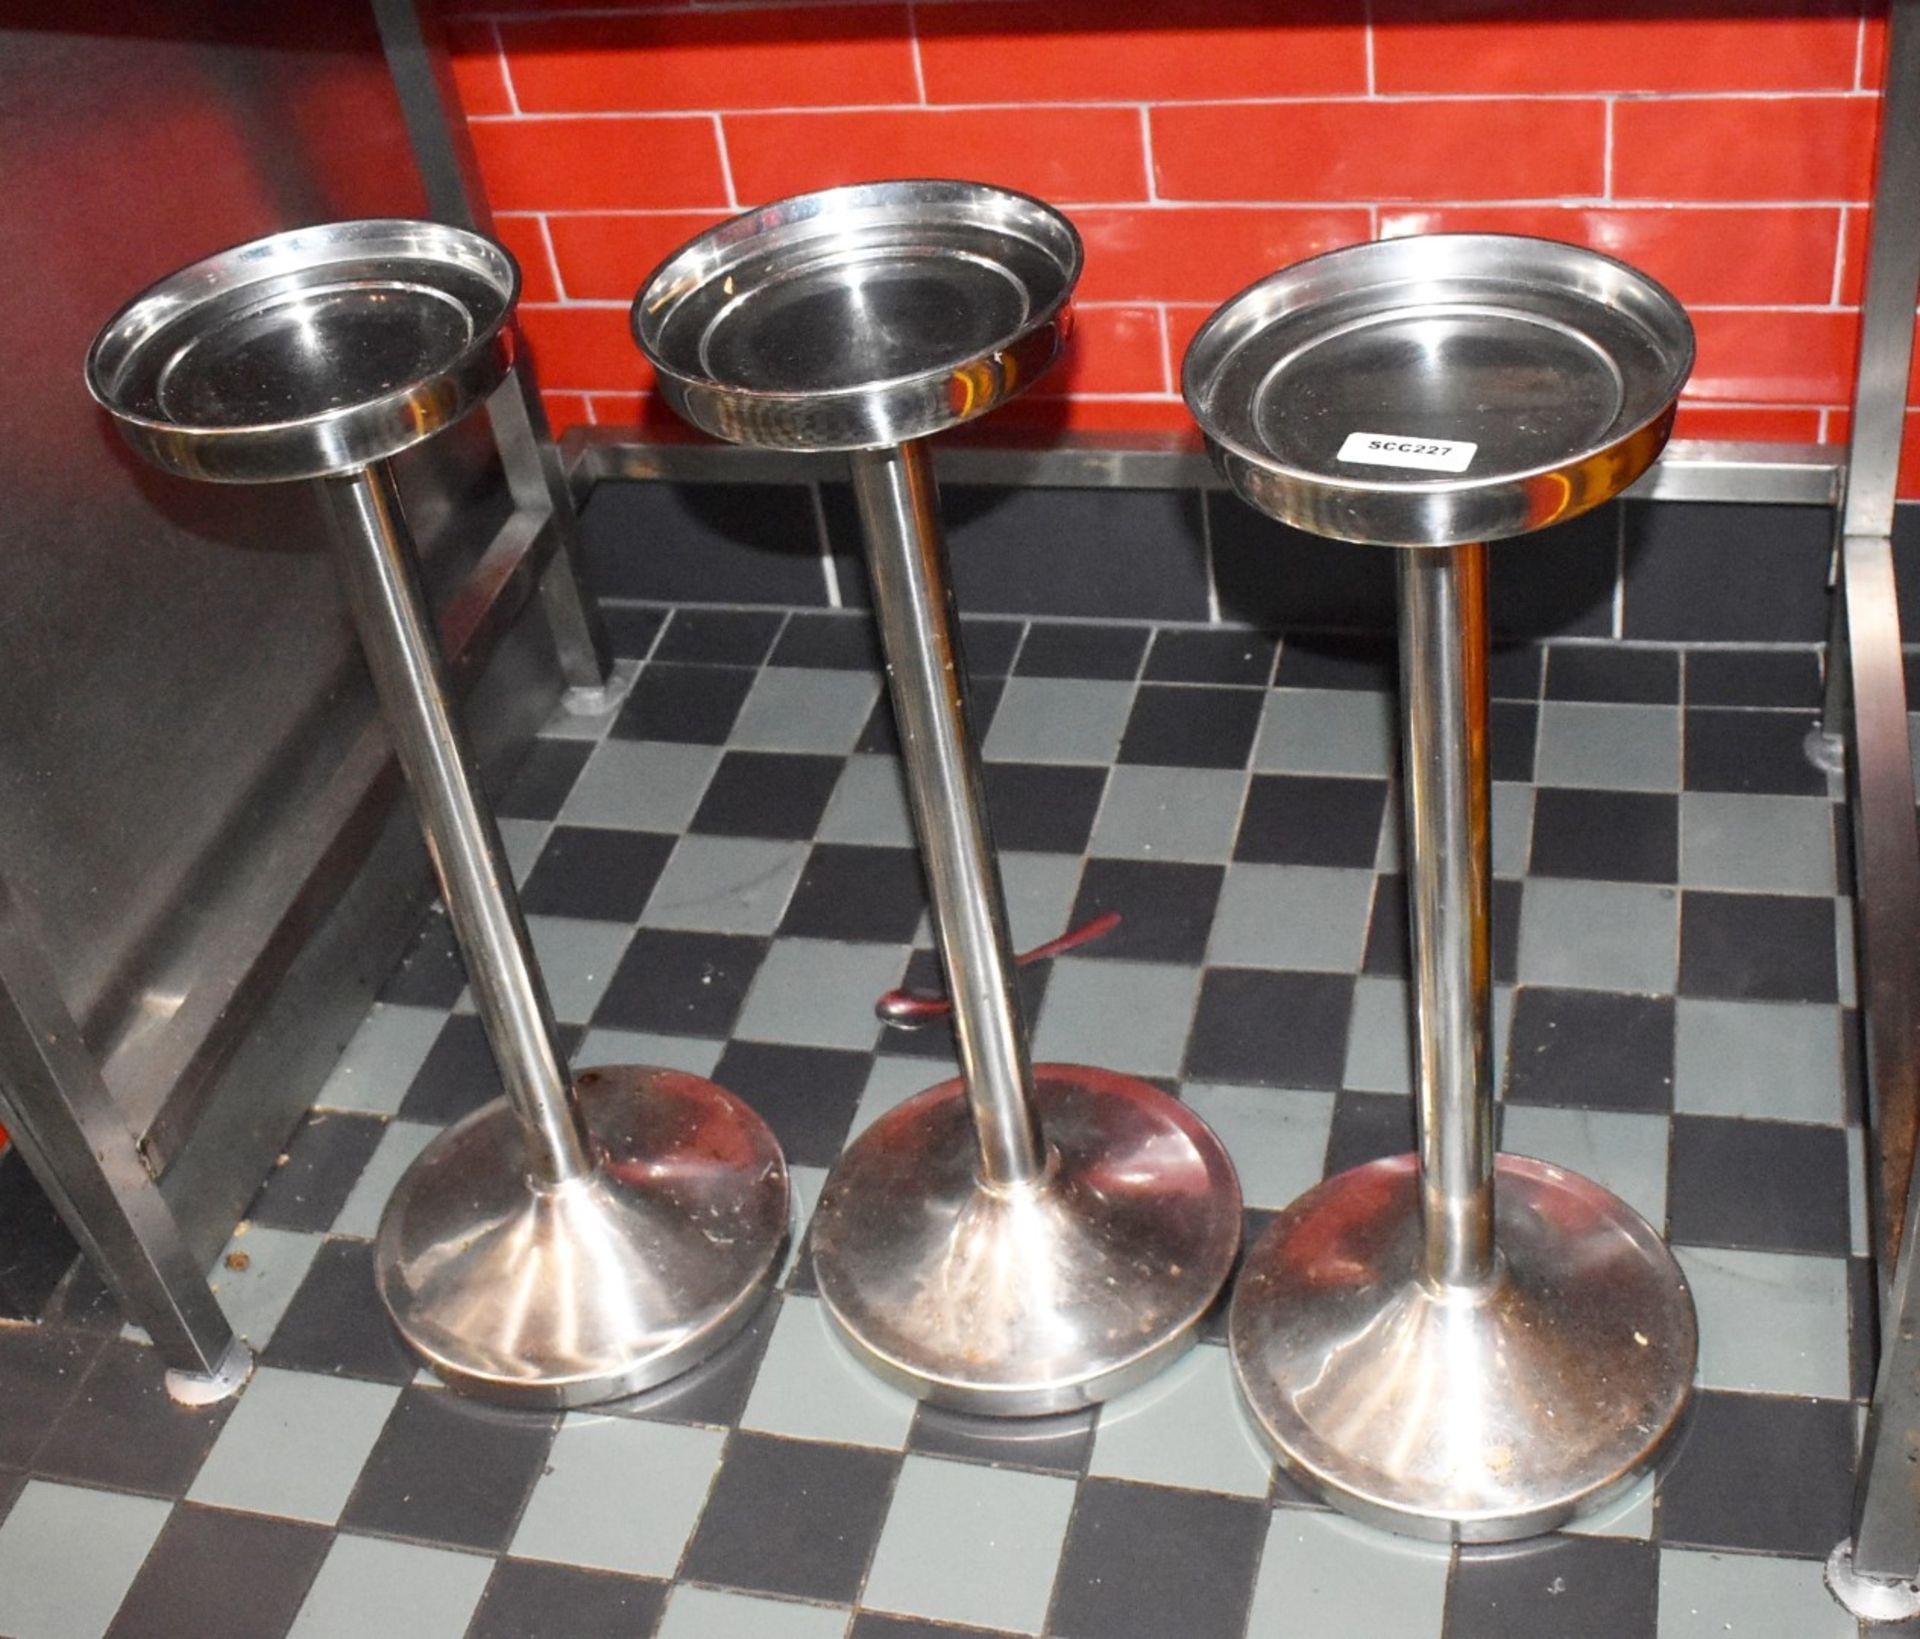 3 x Ice Bucket Stands With Chrome Finish - From a Popular American Diner